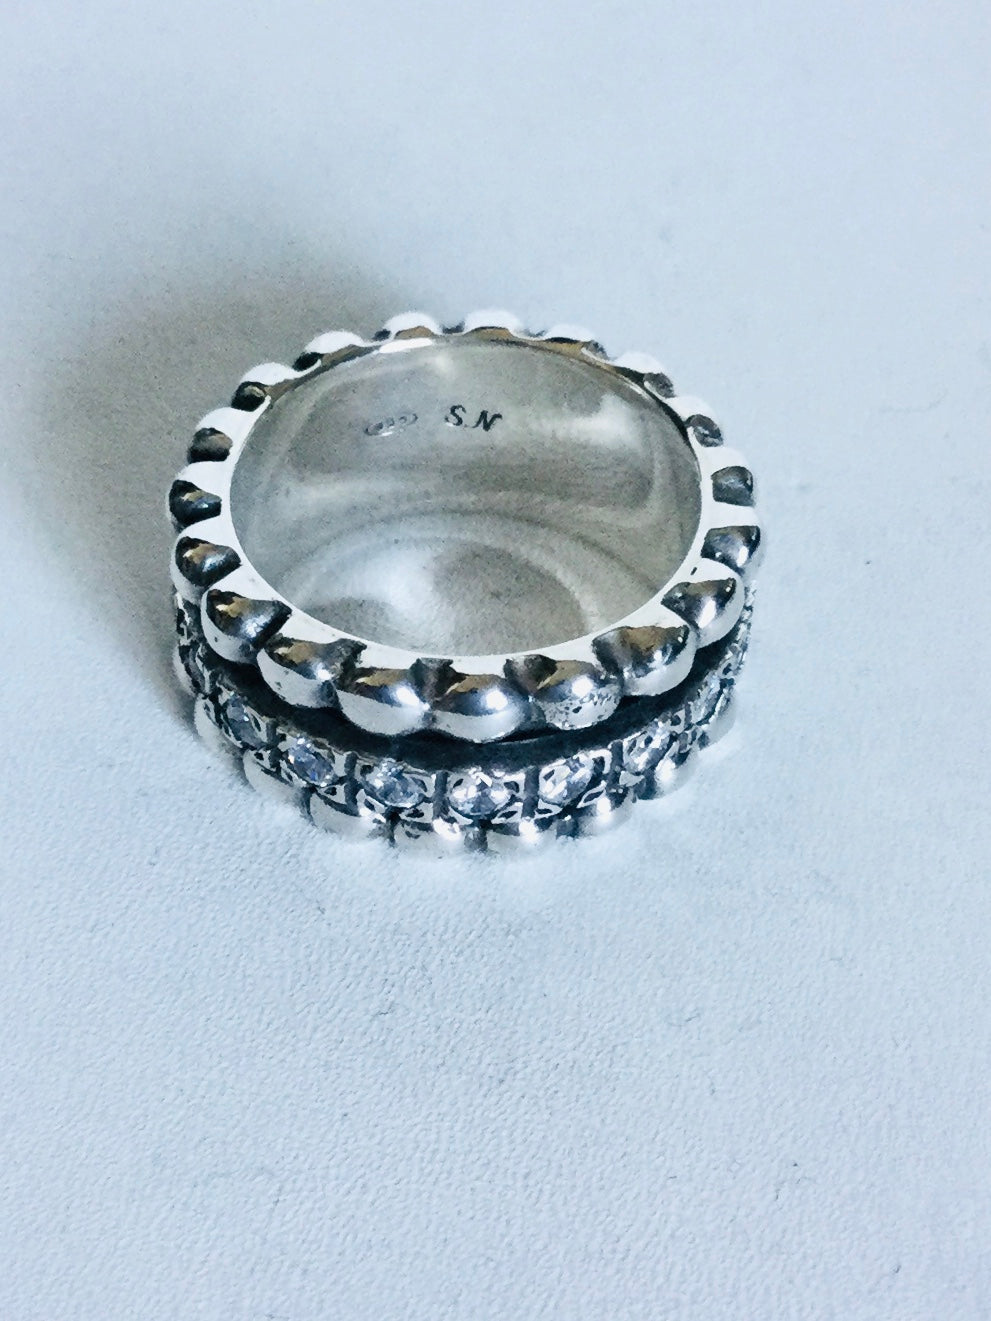 Sterling silver cubic zirconia Spinner ring and beaded edging